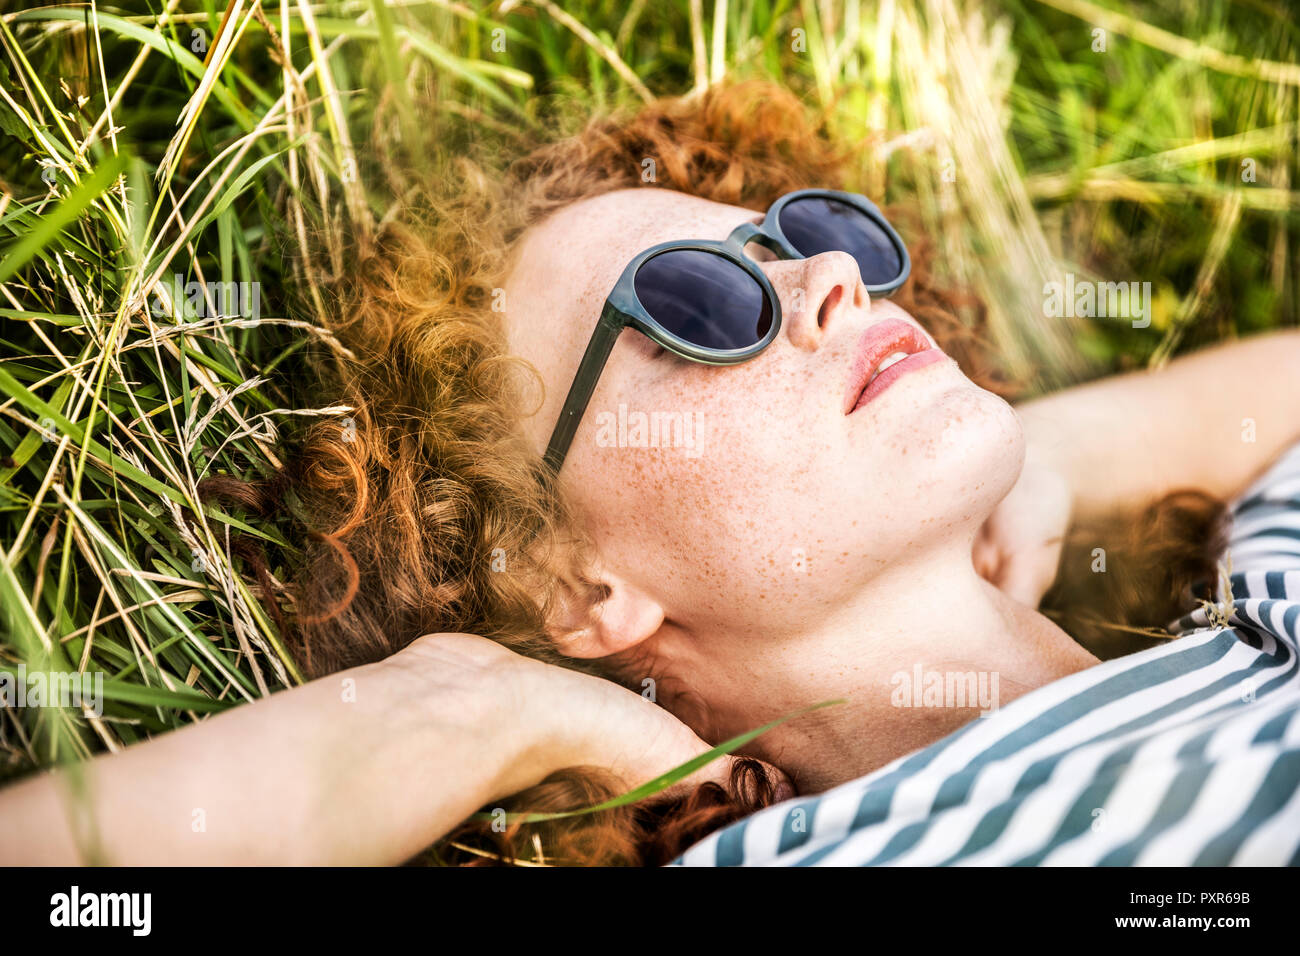 Young woman wearing sunglasses relaxing on a meadow Stock Photo